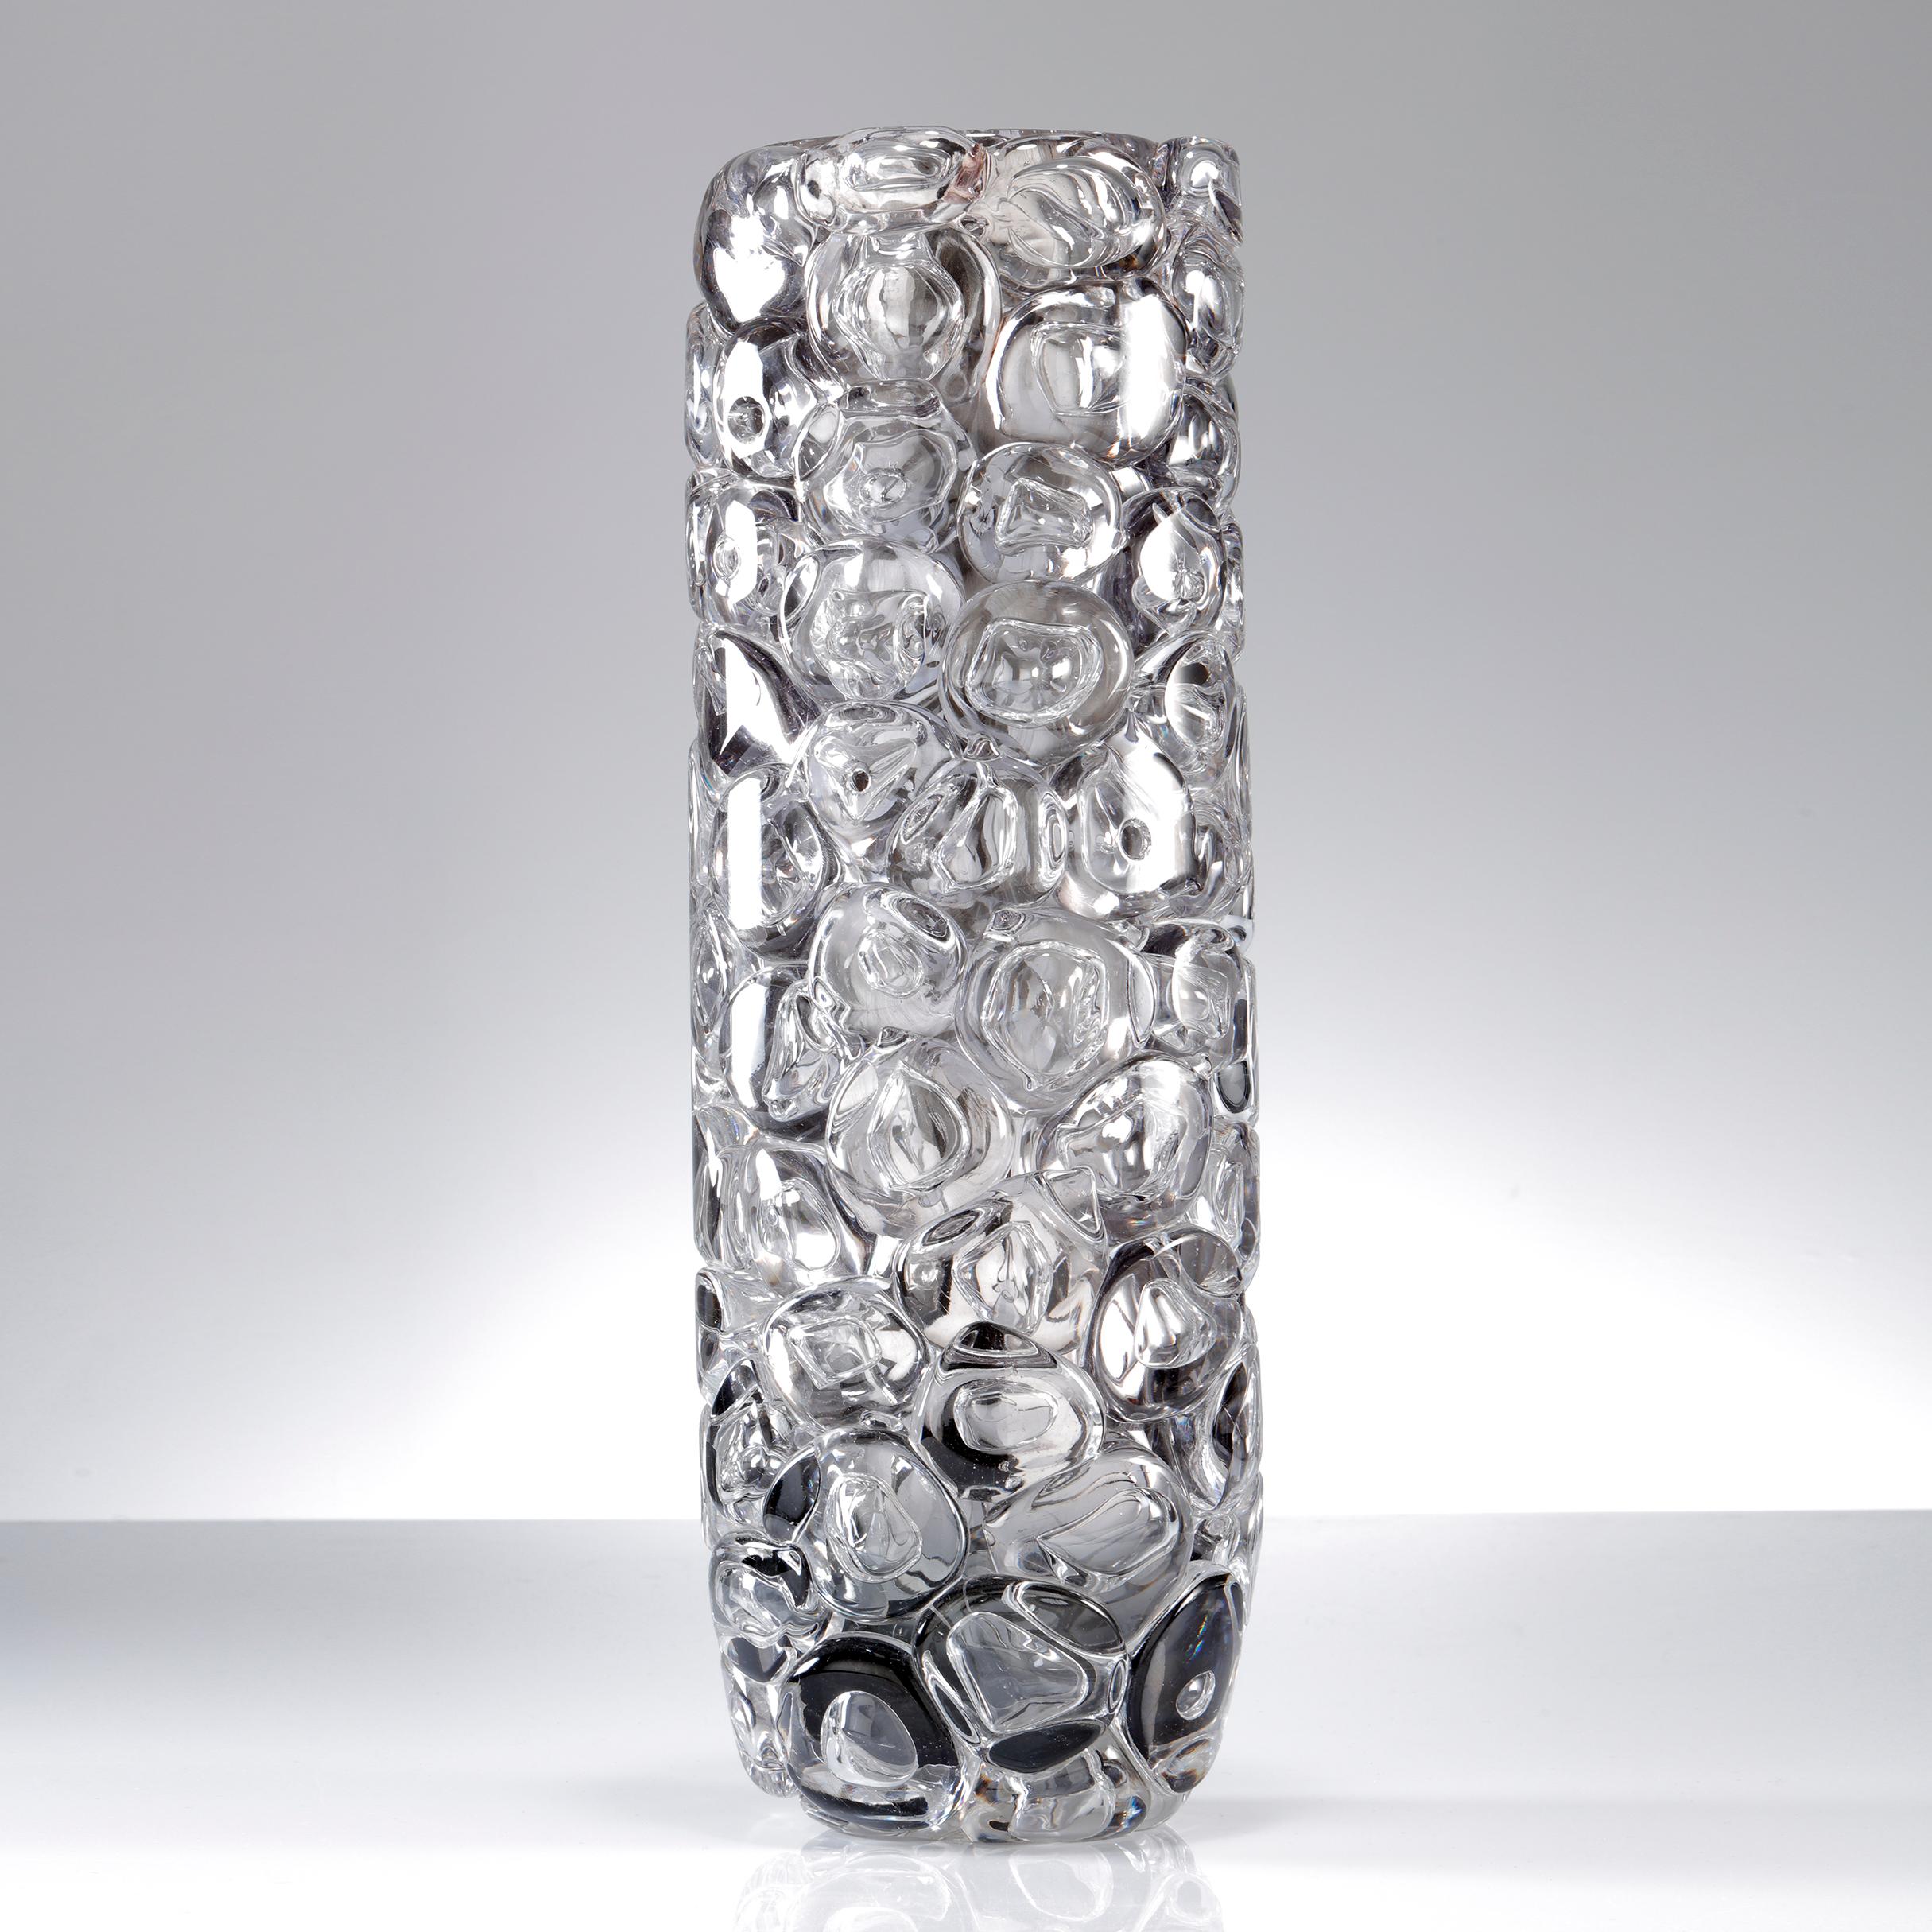 Organic Modern Bubblewrap in Monochrome II, a Silver and Clear Glass Vase by Allister Malcolm